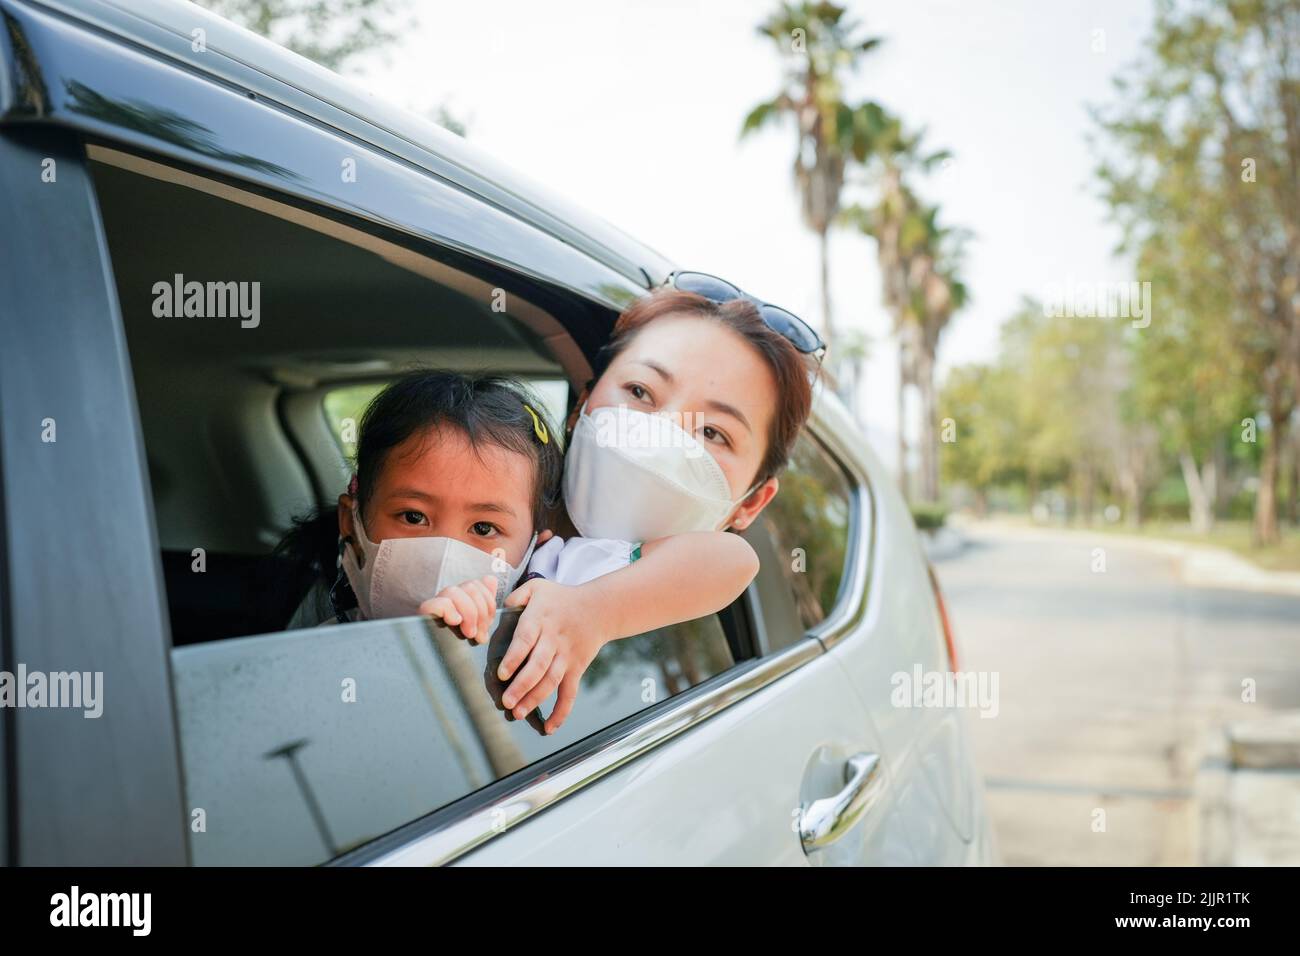 A beautiful Southeast Asian woman and her child wearing face masks looking out of the car window Stock Photo